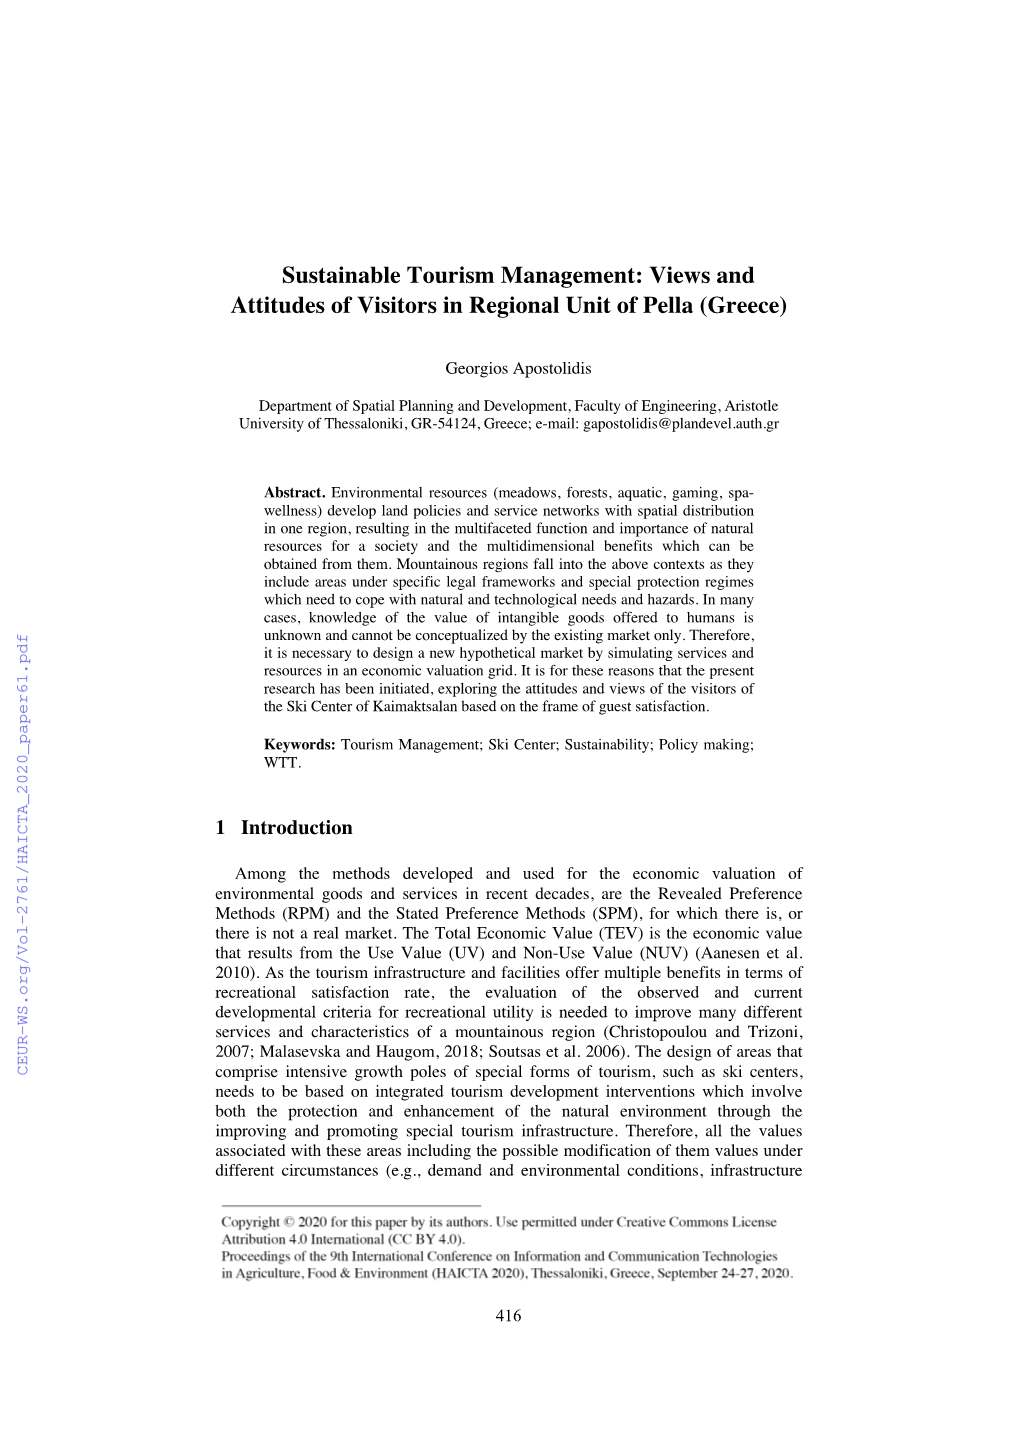 Sustainable Tourism Management: Views and Attitudes of Visitors in Regional Unit of Pella (Greece)